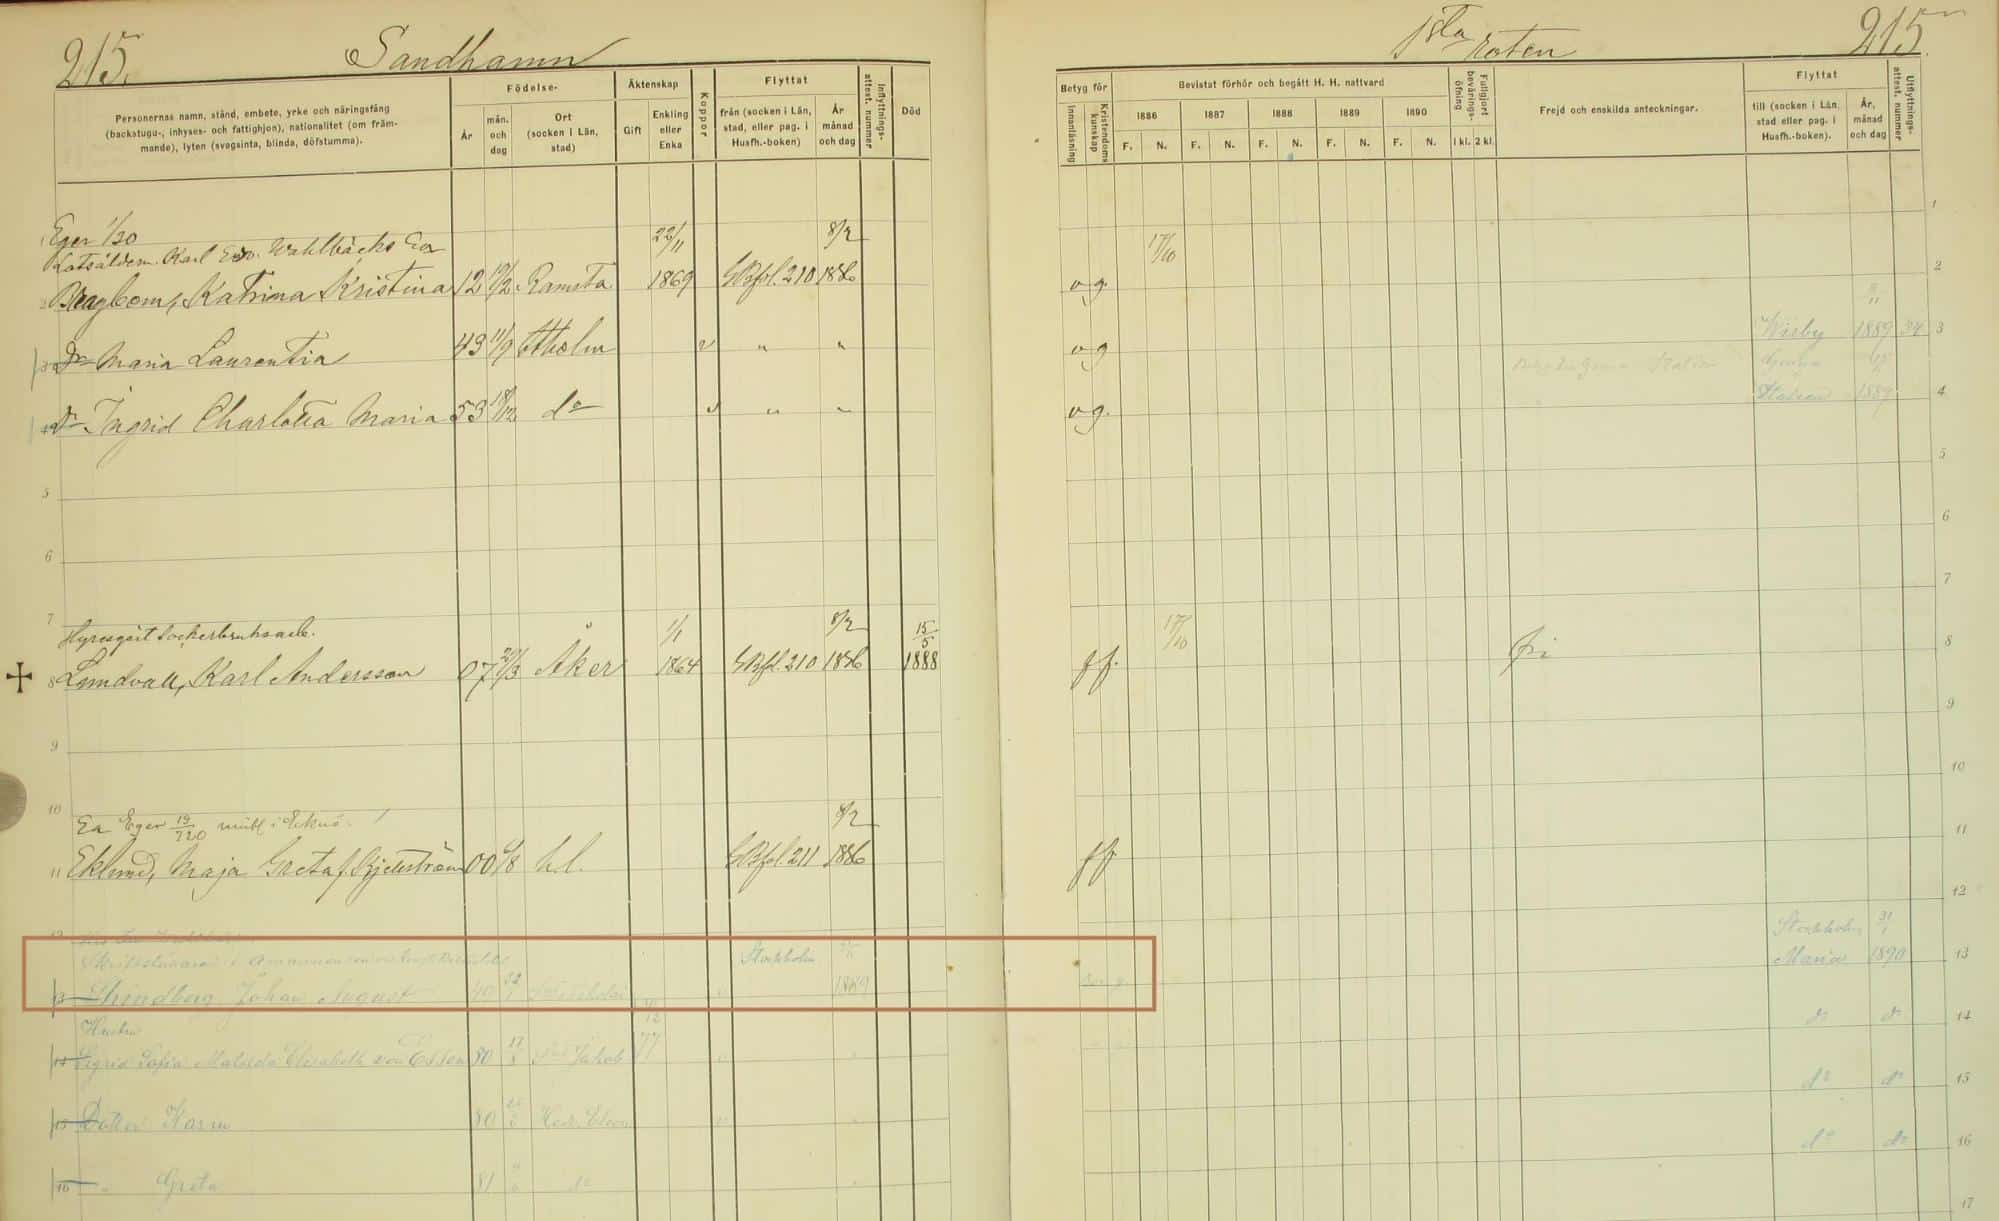 Sweden Household Examination Record of August Strindberg [Credit: MyHeritage Sweden Household Examination Books, 1820-1947]